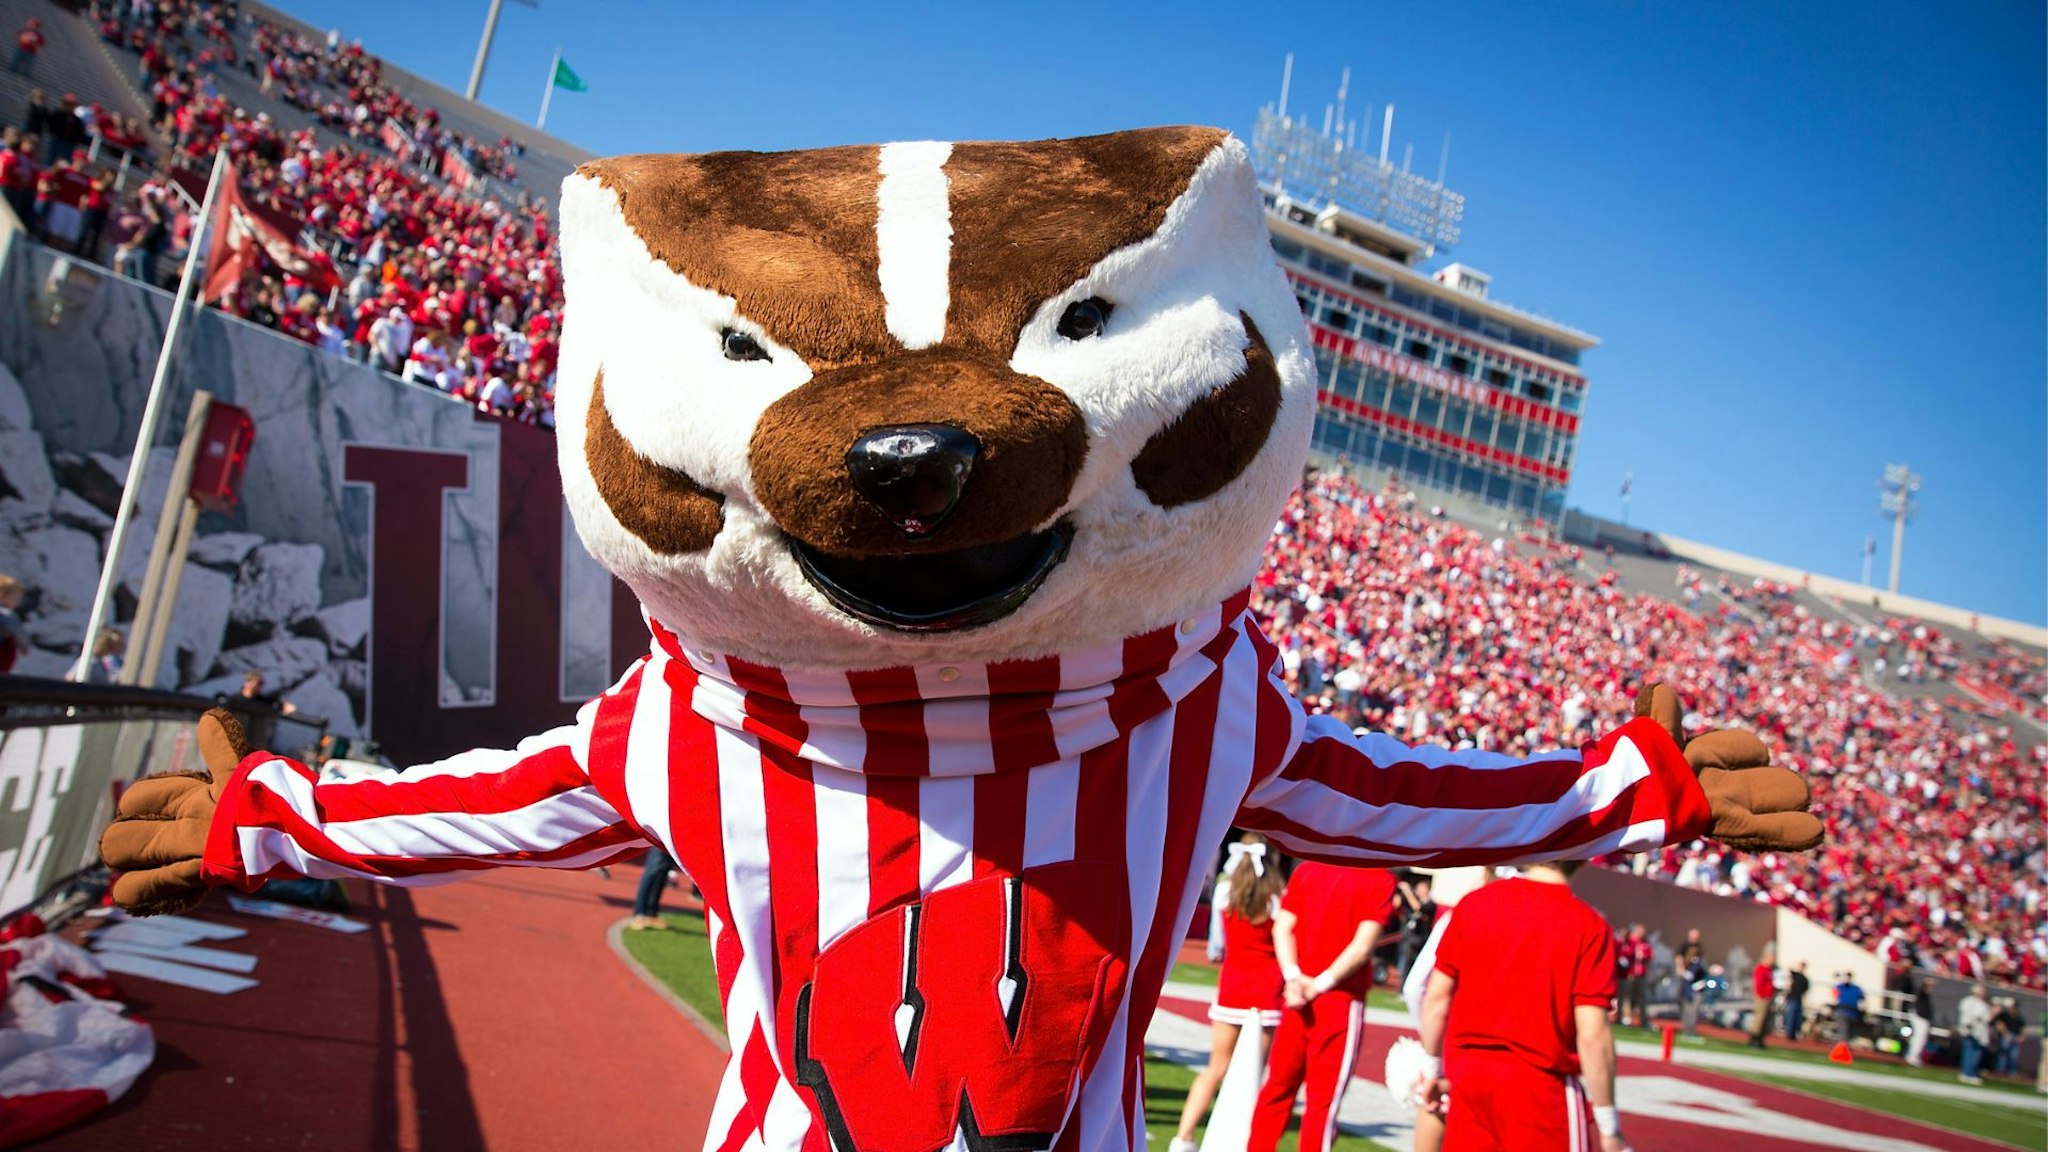 BLOOMINGTON, IN - NOVEMBER 10: Bucky Badger of the Wisconsin Badgers is seen on the field during the game against the Indiana Hoosiers at Memorial Stadium on November 10, 2012 in Bloomington, Indiana.